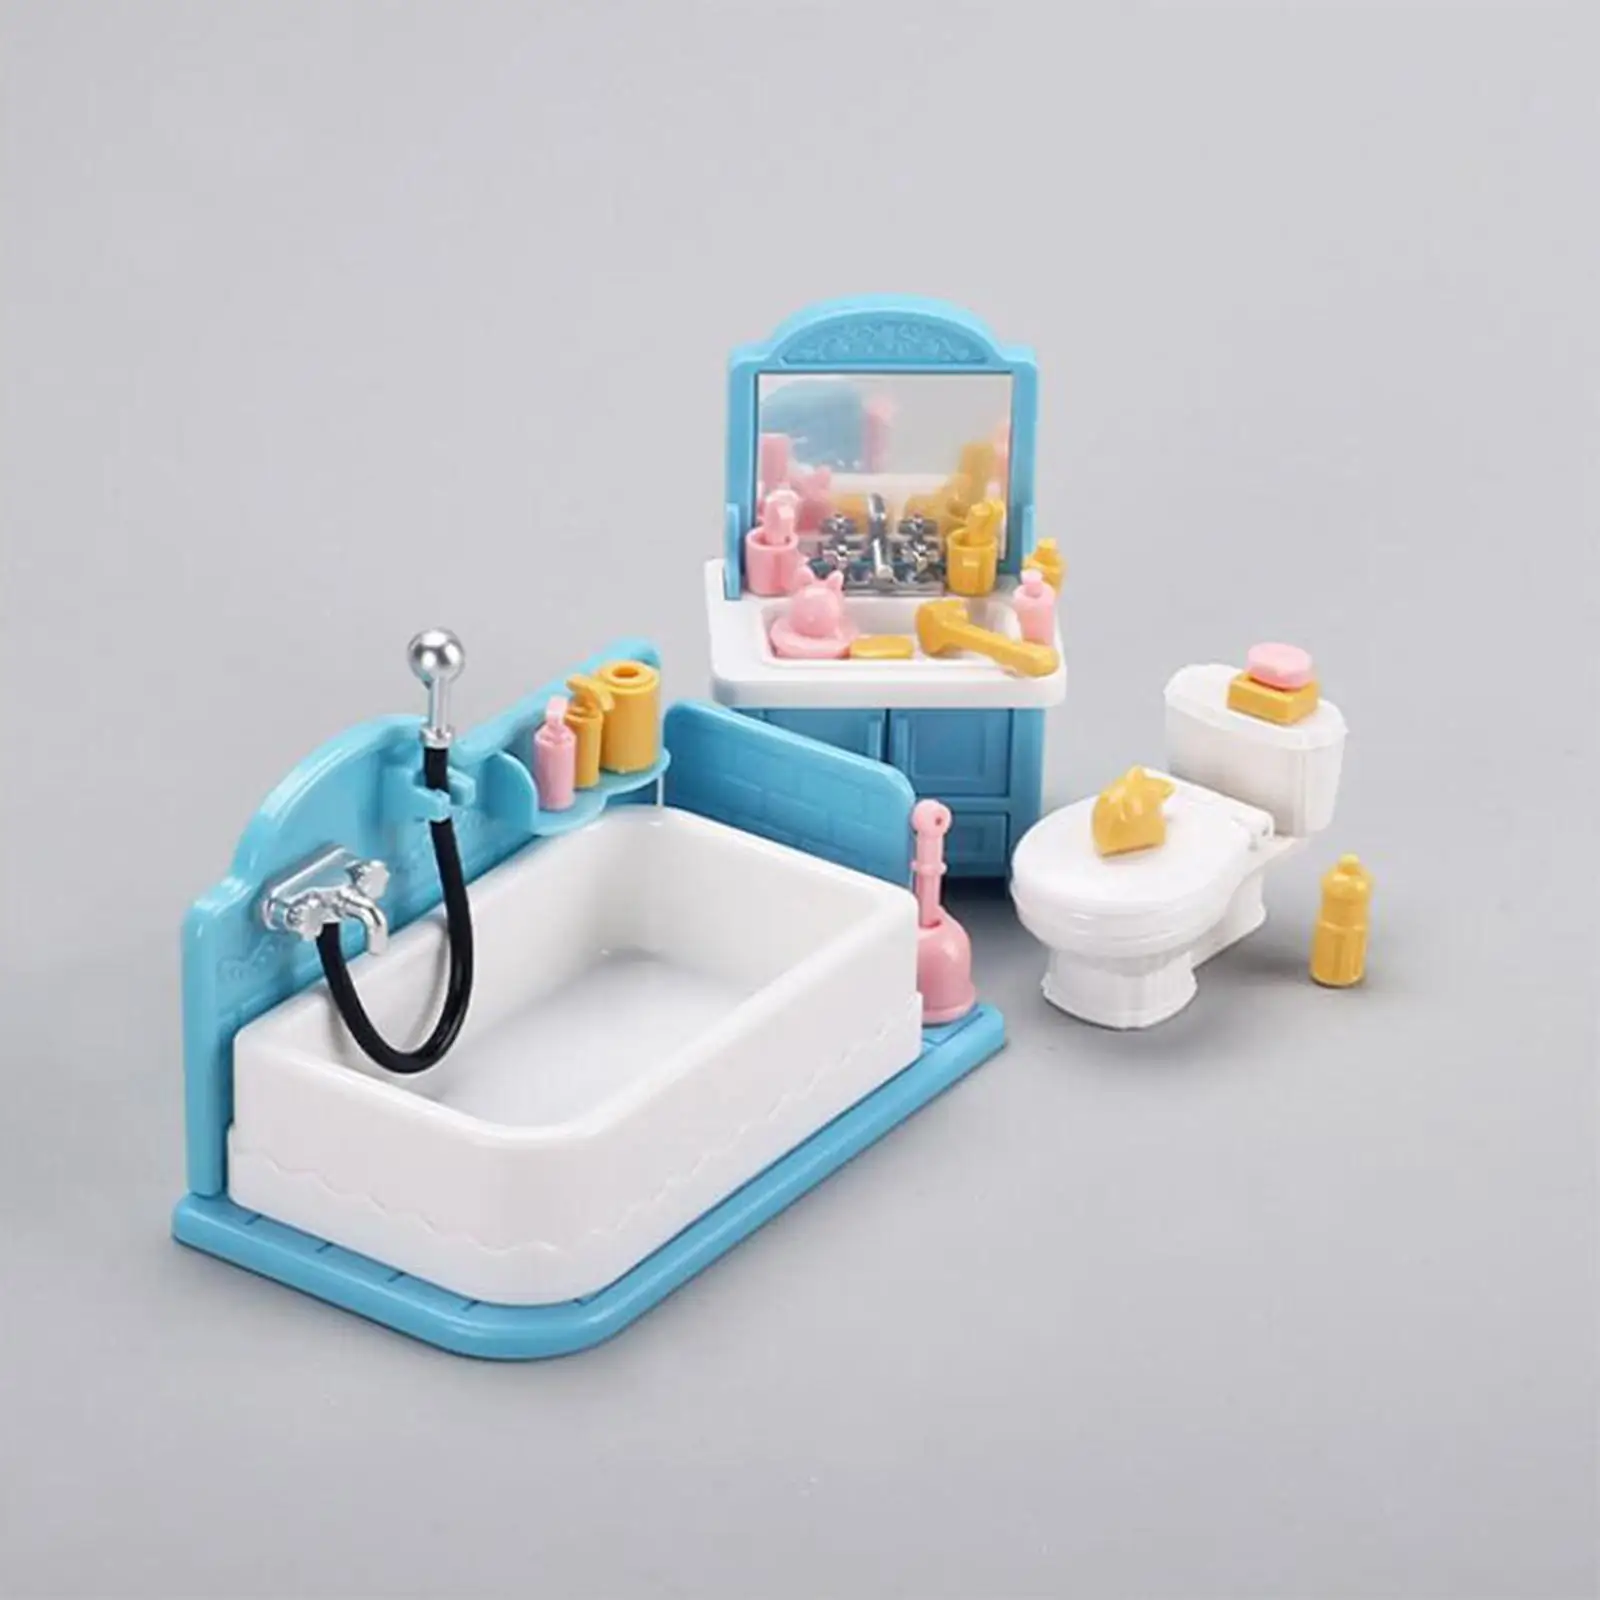 1/12 Dollhouse Bathroom Set Pretend Play Toy Ornament Playset Miniature Furniture Toys with Accessories Doll House Decorations